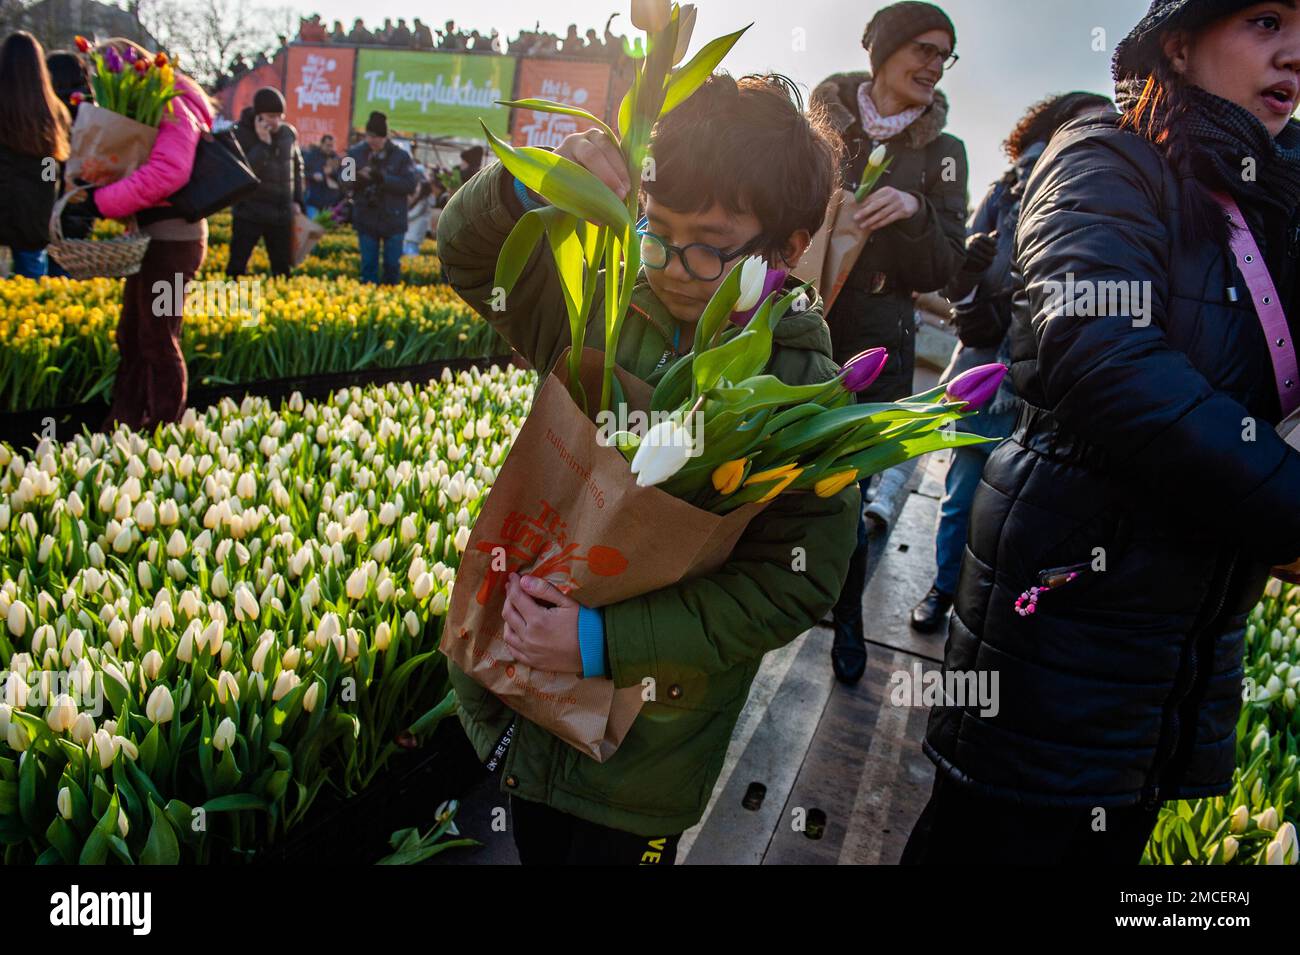 A little boy seen holding a paper bag full of tulips. Each year on the 3rd Saturday of January, the National Tulip Day is celebrated in Amsterdam. Dutch tulip growers built a huge picking garden with more than 200,000 colorful tulips at the Museumplein in Amsterdam. Visitors are allowed to pick tulips for free. The event was opened by Olympic skating champion, Irene Schouten. Prior to the opening, she christened a new tulip: Tulipa 'Dutch Pearl' as a reference to the world - famous painting 'The girl with a pearl earring' by Johannes Vermeer. Stock Photo